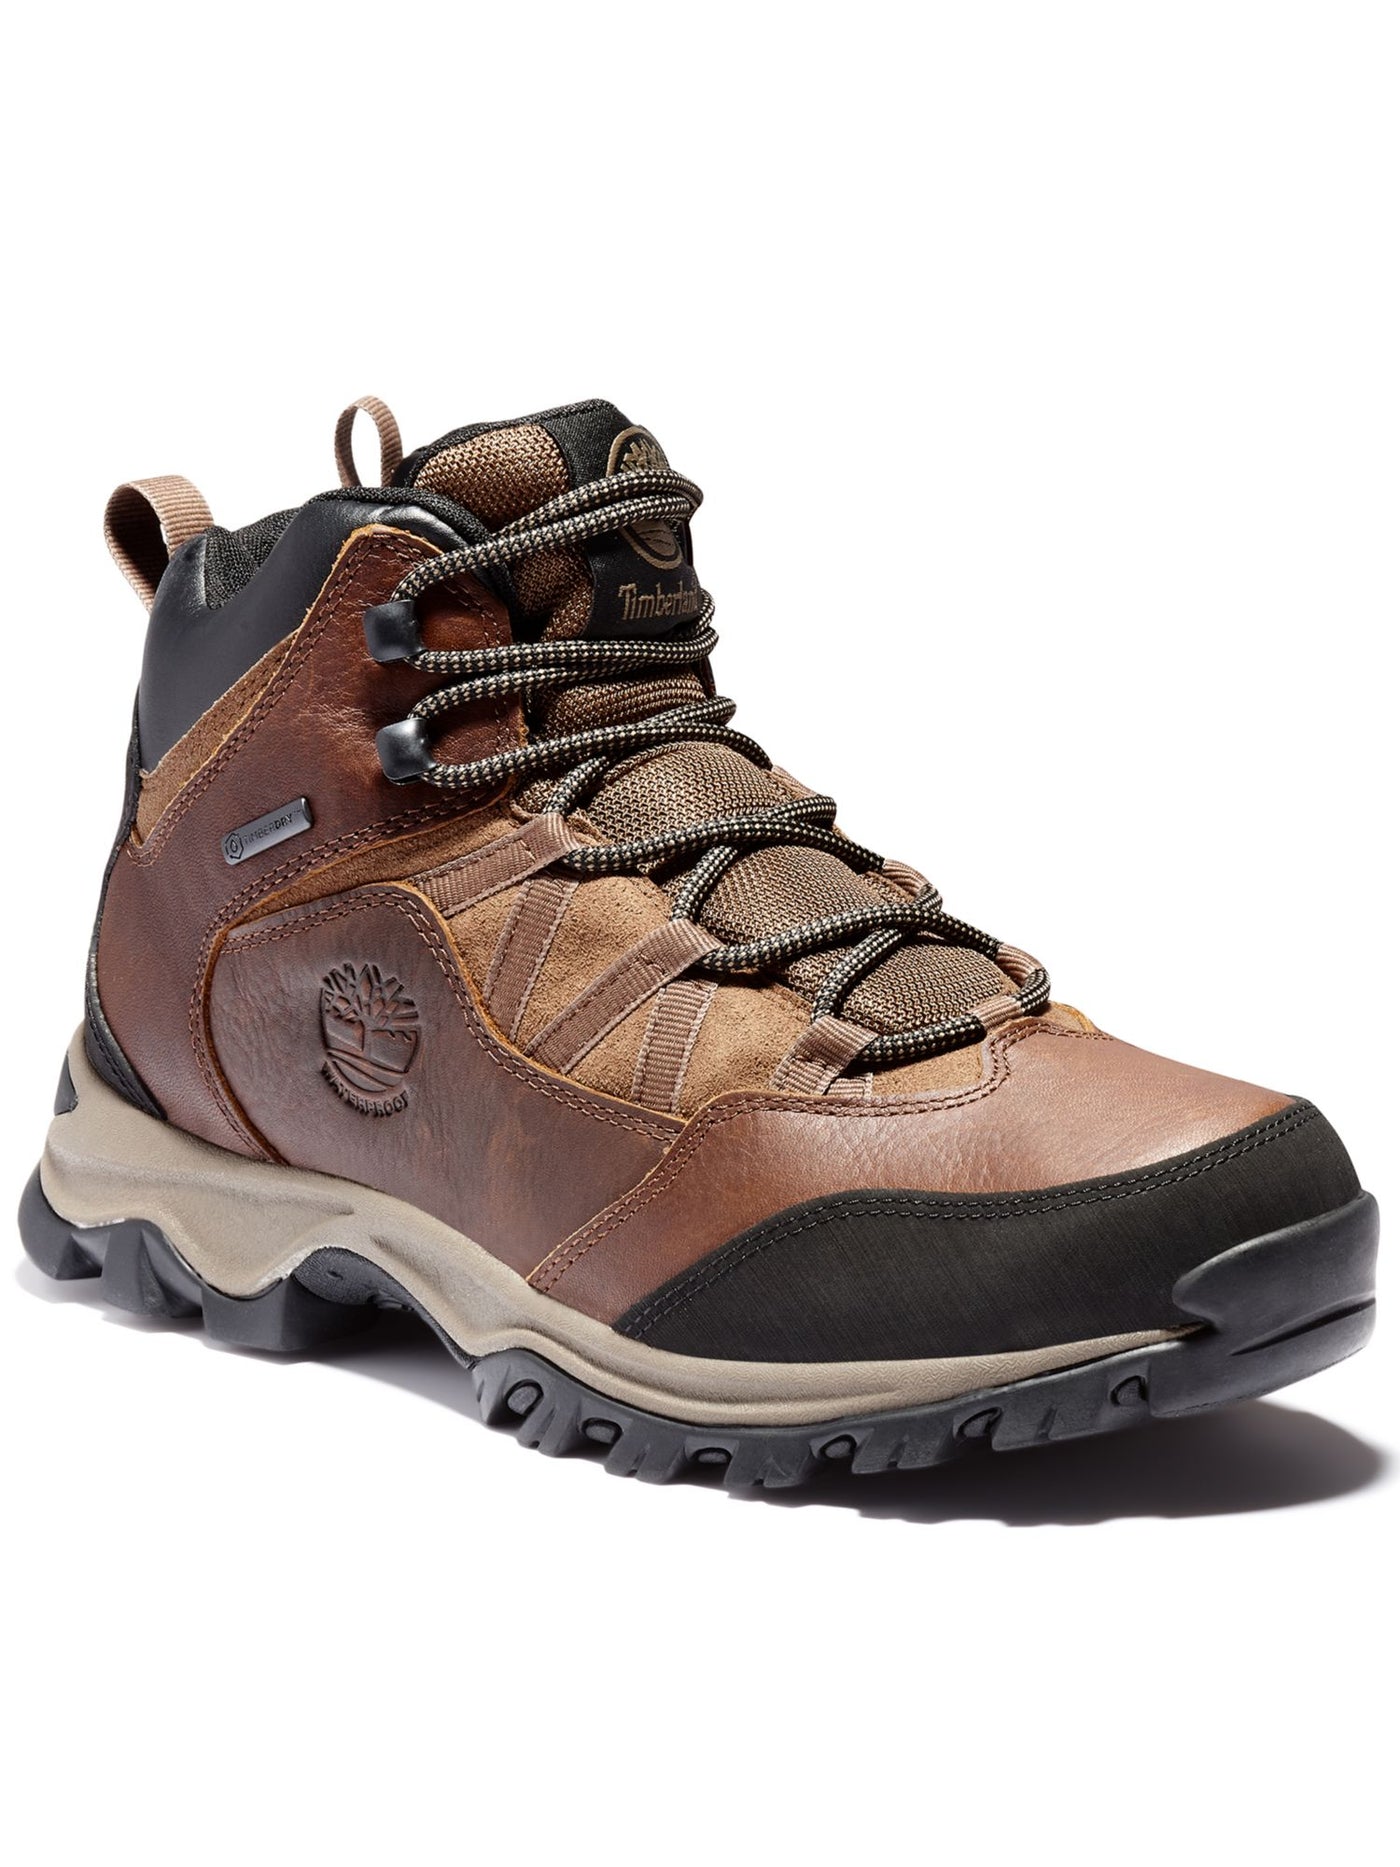 TIMBERLAND Mens Brown Shock Absorption Water Resistant Comfort Mt. Major Round Toe Wedge Lace-Up Hiking Boots 13 M